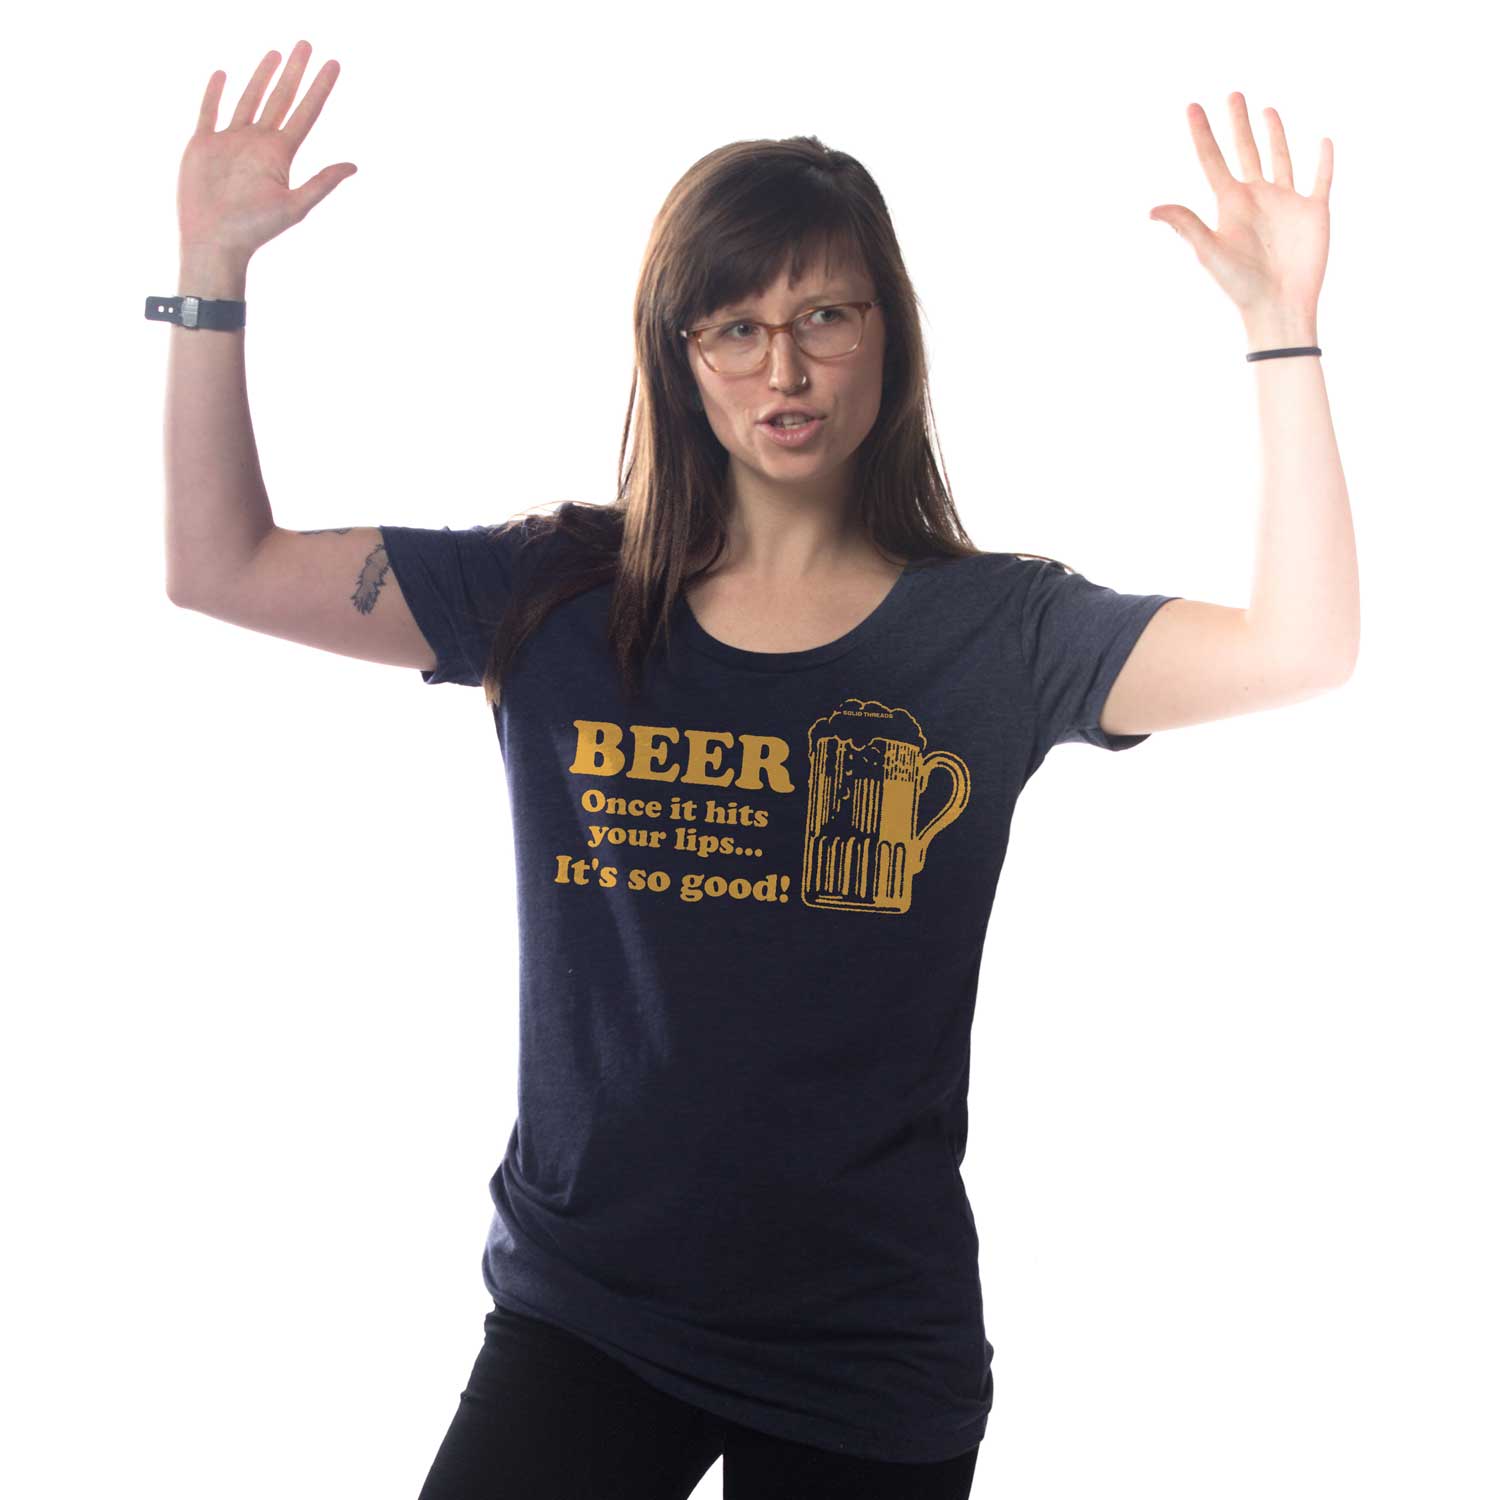 Women's Beer Once It Hits Your Lips Vintage Graphic T-Shirt | Funny Drinking Tee | Solid Threads